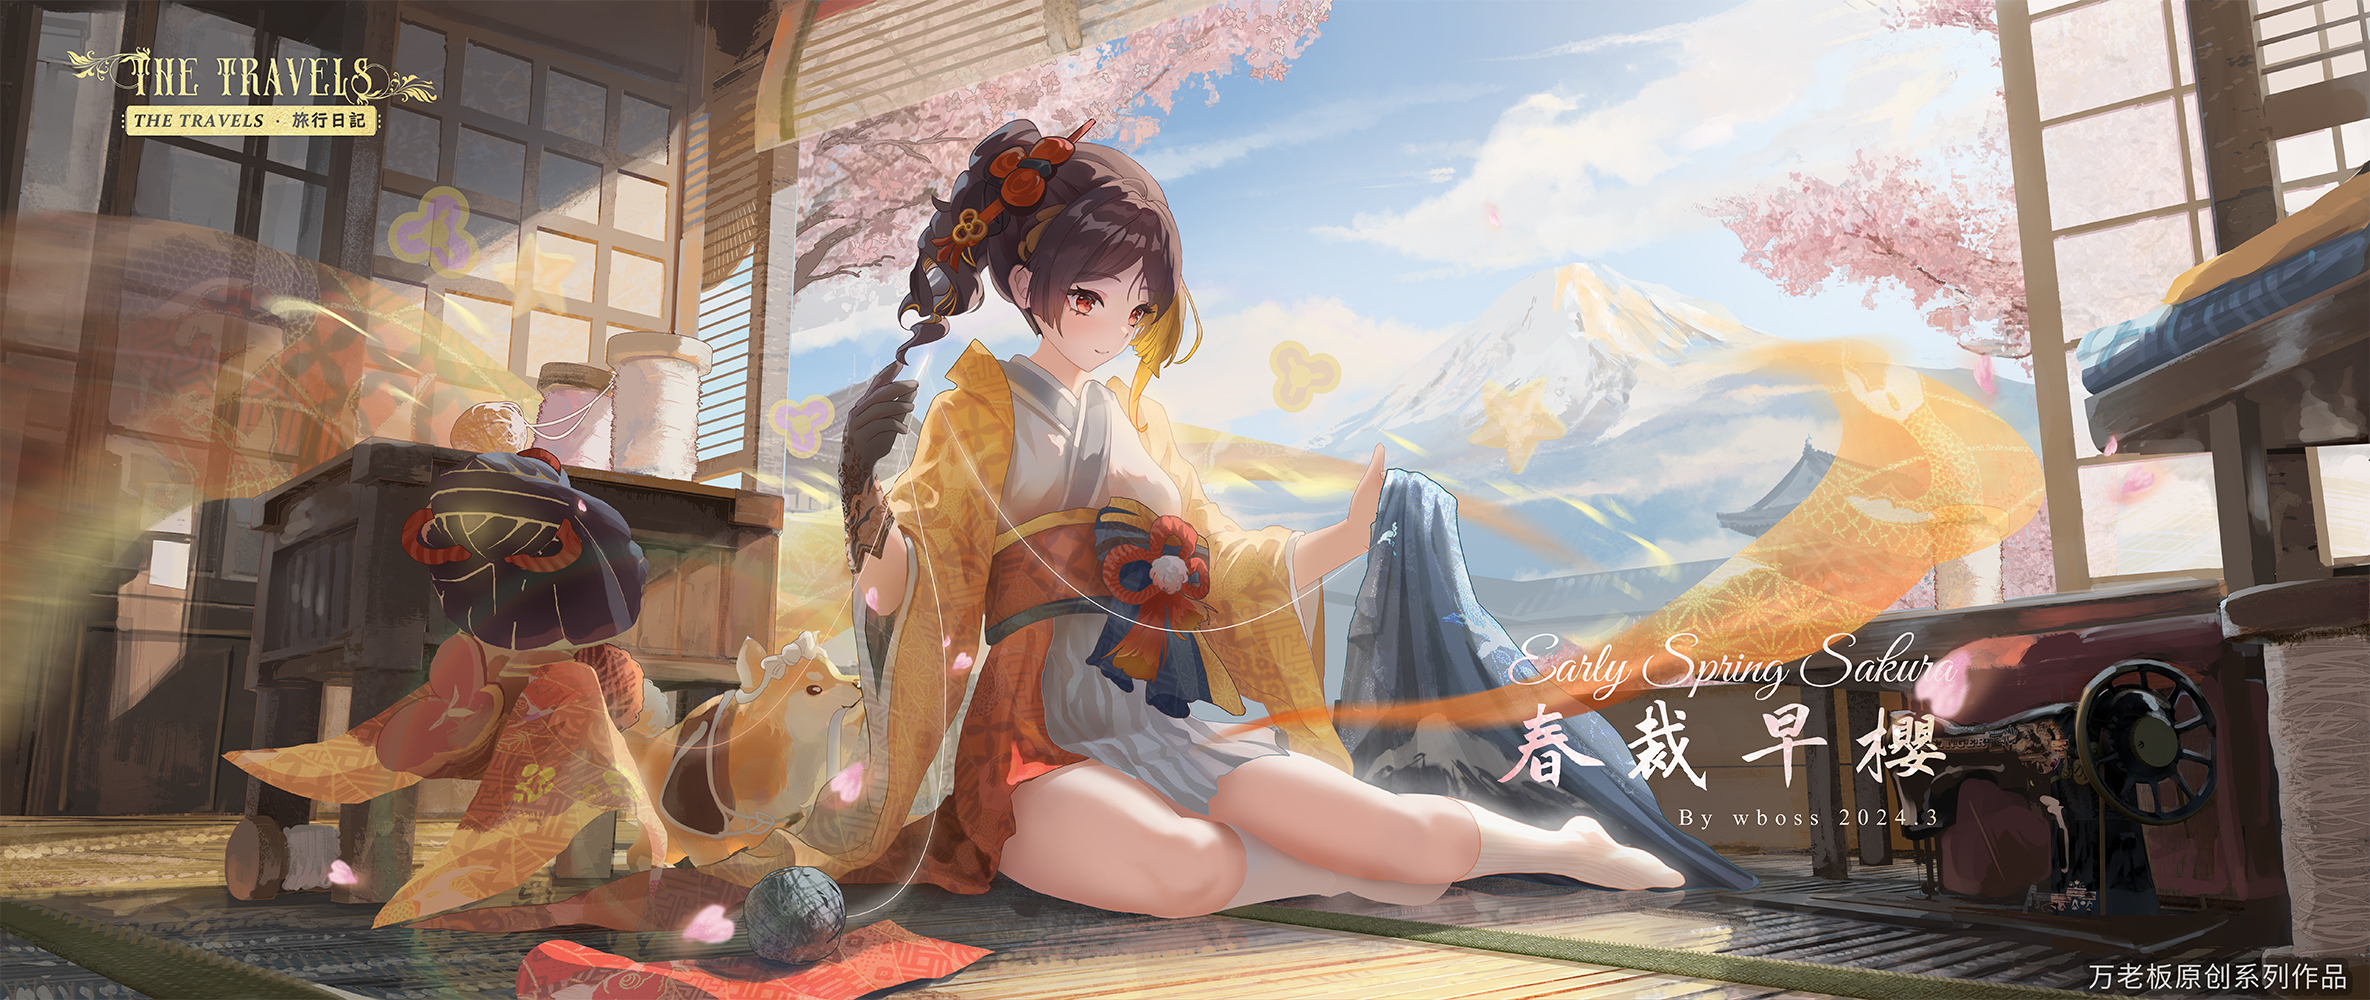 Anime 2370x1000 Genshin Impact kimono Chiori (Genshin Impact) black gloves white socks cherry blossom mountains dog clouds petals spring wboss doll qianzhi anime girls missing glove sunlight watermarked gloves closed mouth smiling